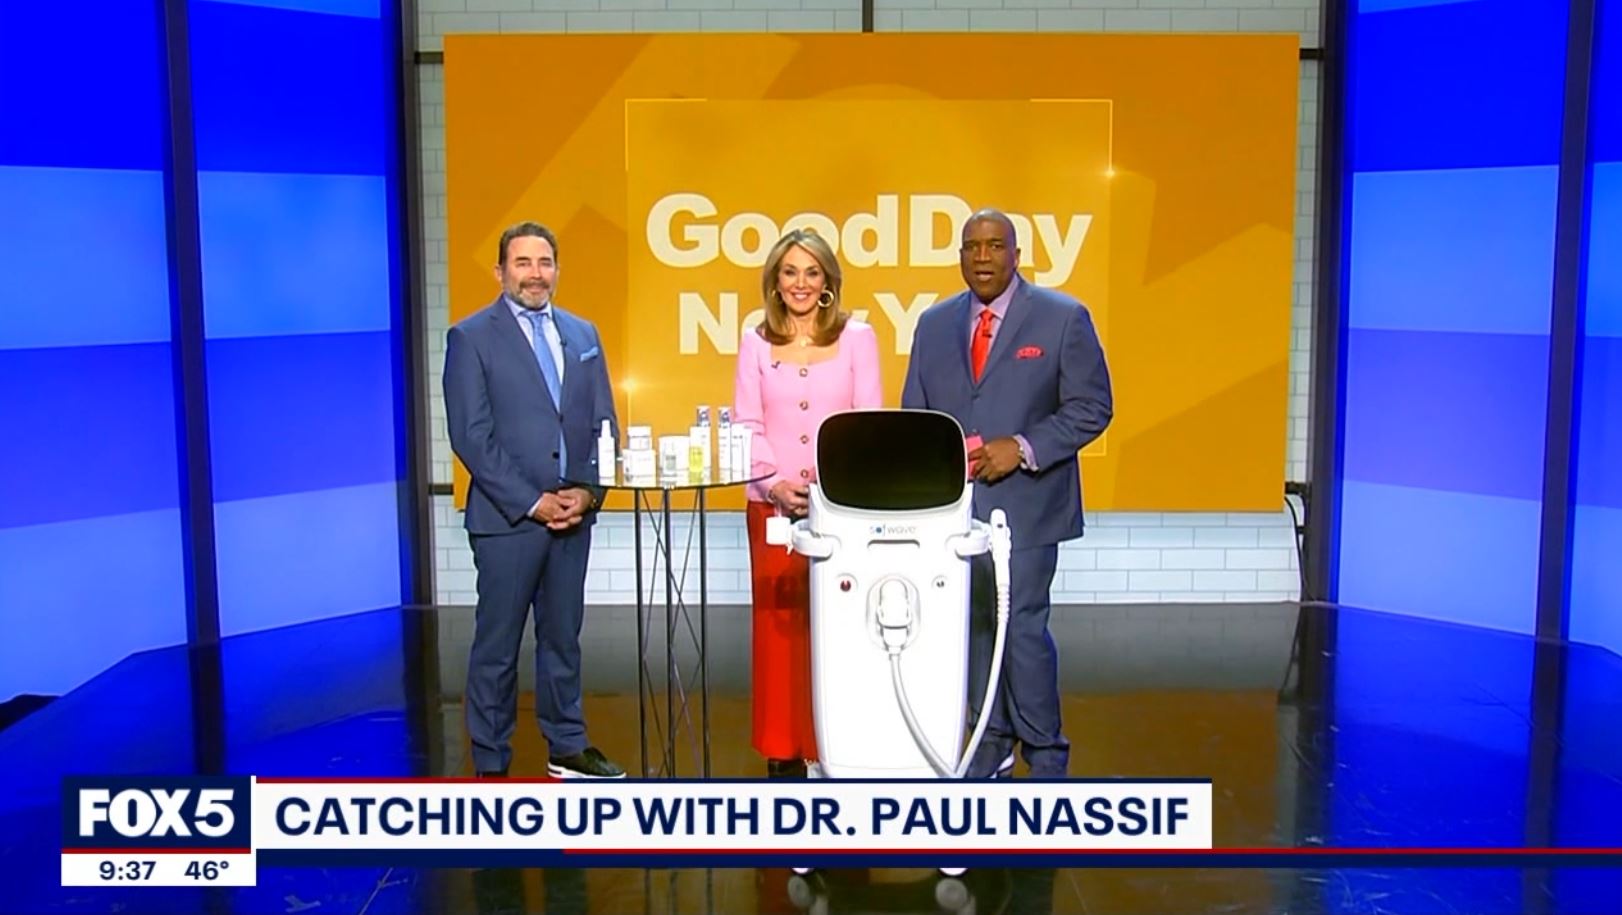 Dr. Paul Nassif of Botched Reveals Non-Surgical Face and Body Toning Secrets